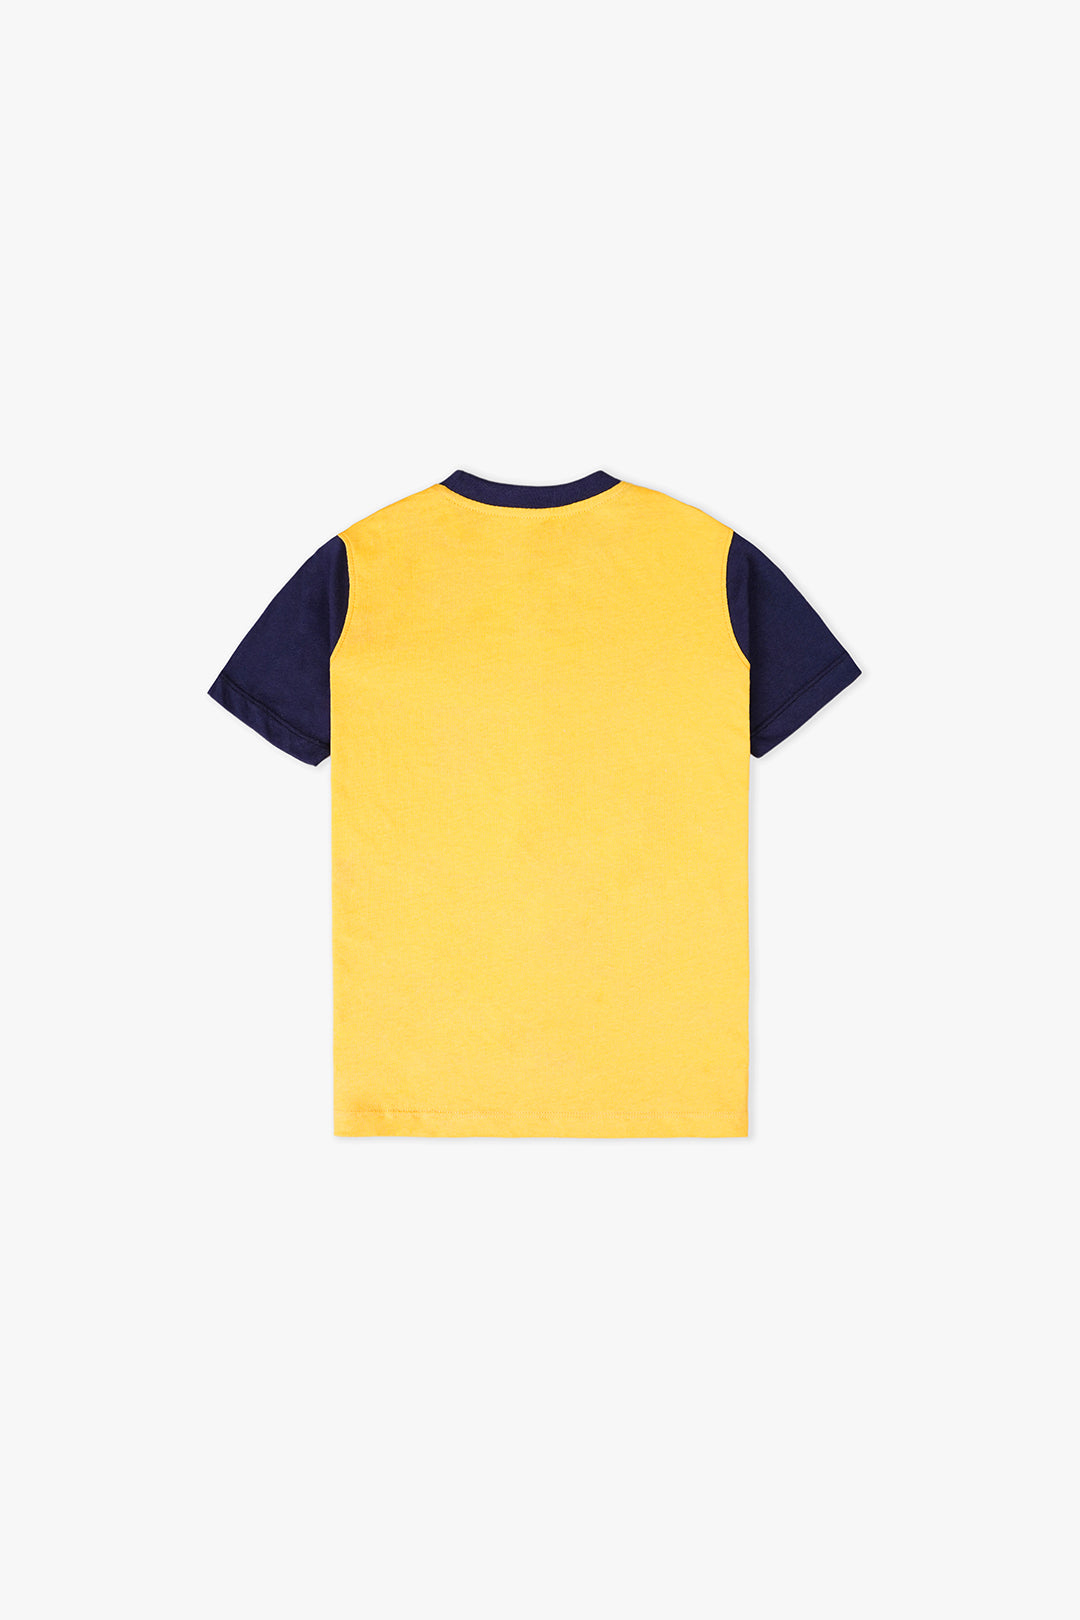 Boy's Oceanic Printed Tee Shirt With Contrast Sleeve & Neck